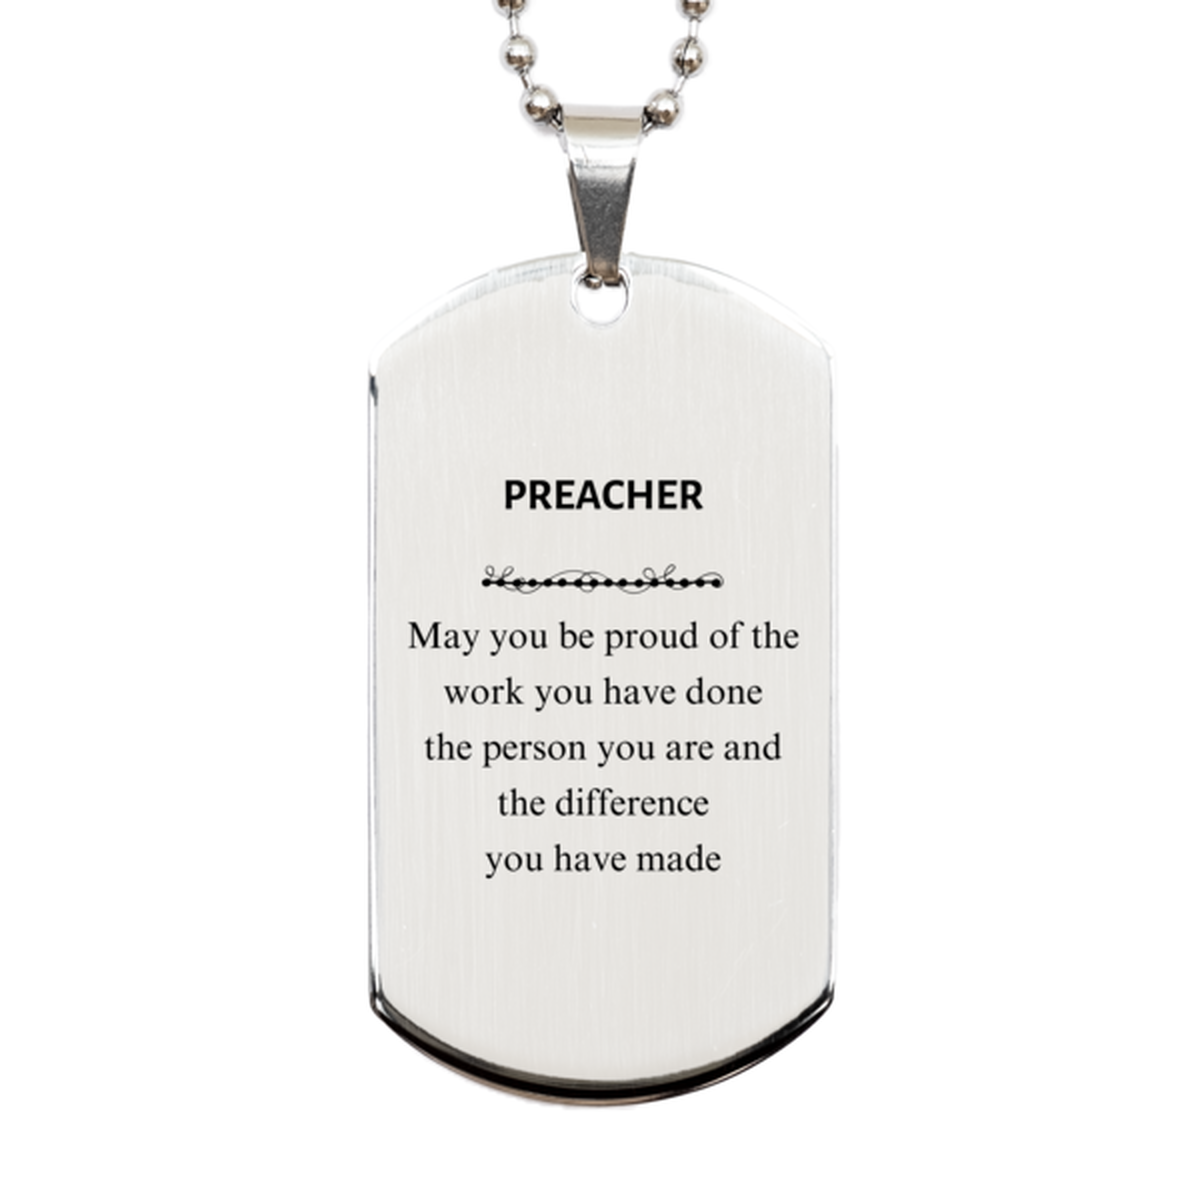 Preacher May you be proud of the work you have done, Retirement Preacher Silver Dog Tag for Colleague Appreciation Gifts Amazing for Preacher